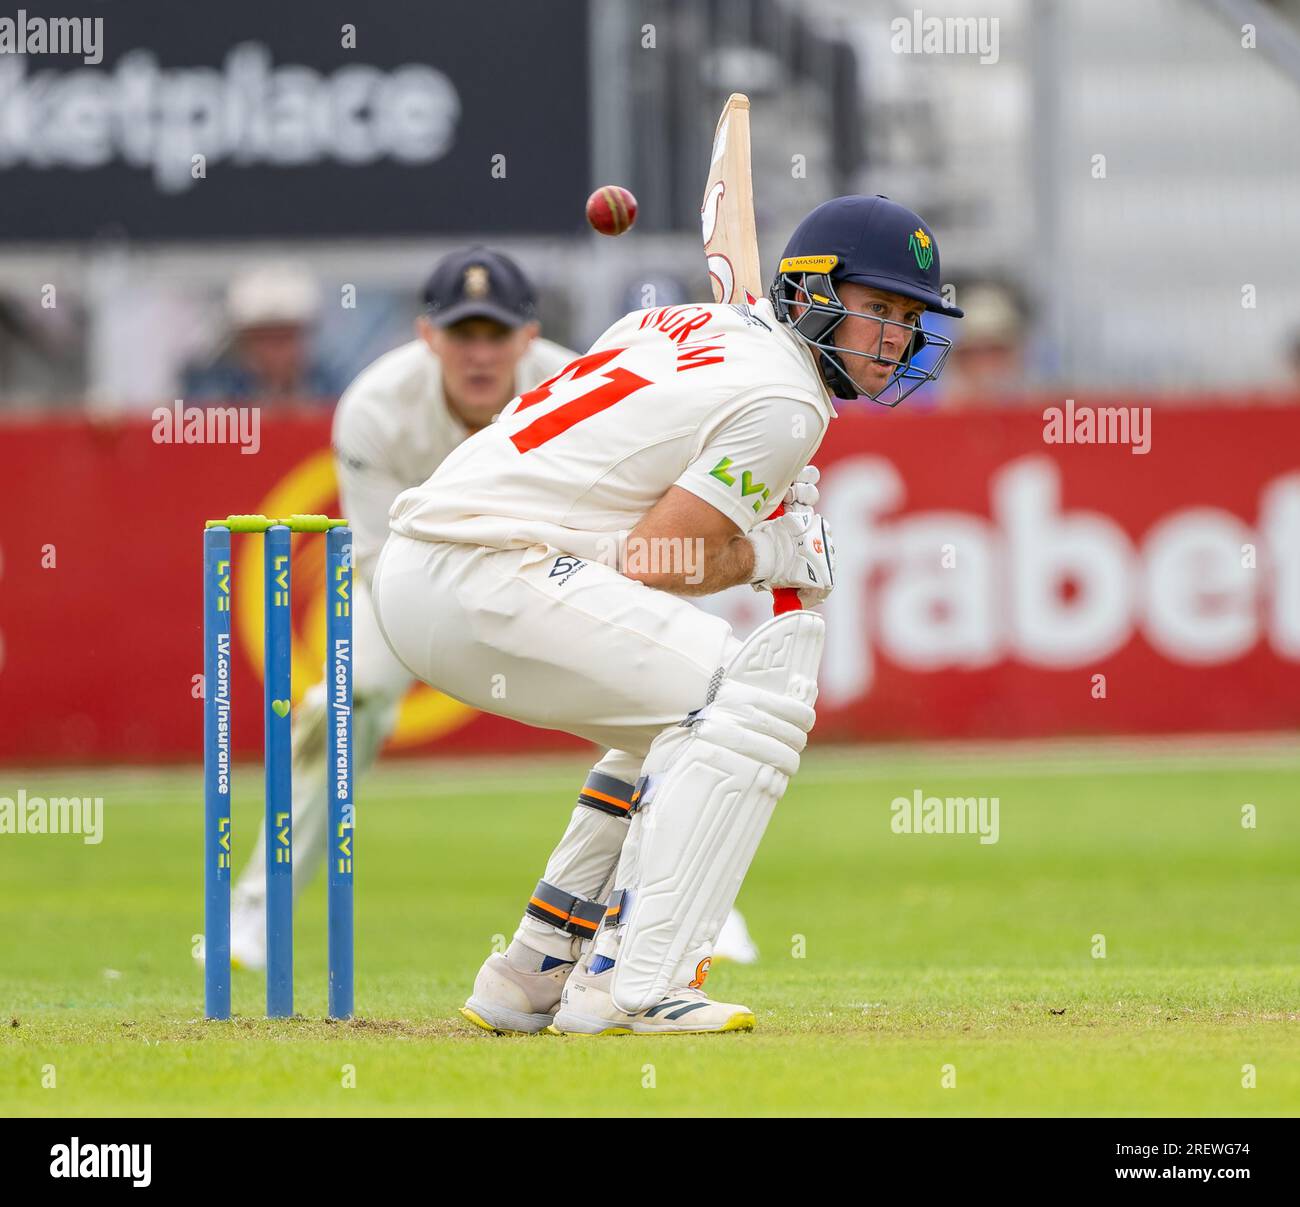 Colin Ingram batting for Glamorgan avoids a bouncer in a County Championship Match between Derbyshire and Glamorgan Stock Photo